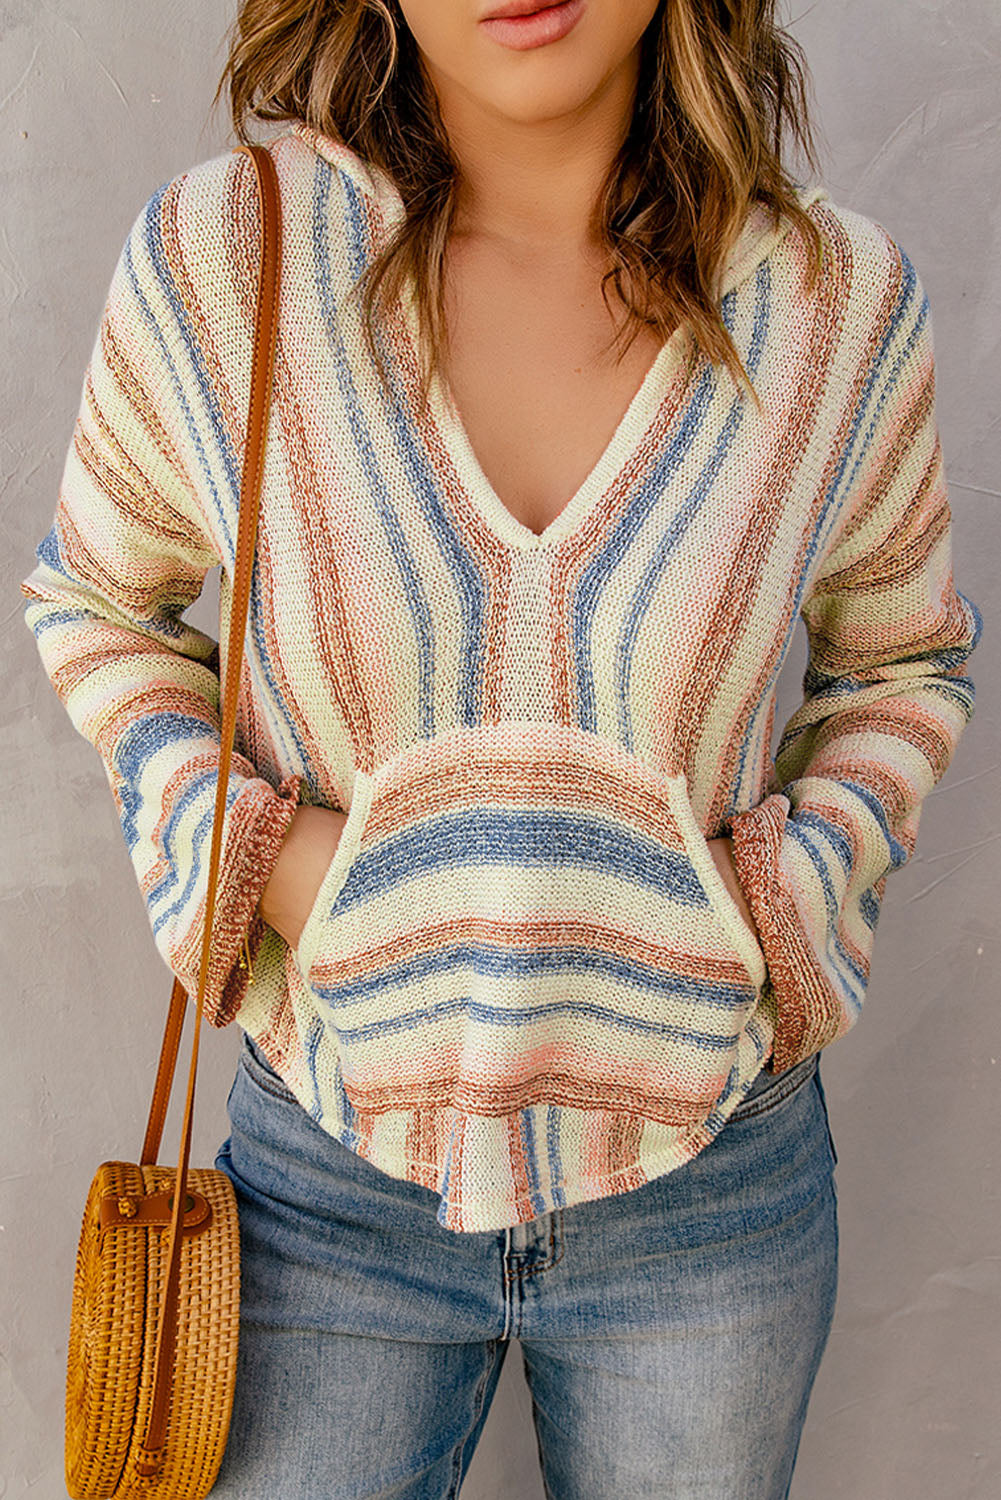 Striped Hooded Sweater with Kangaroo Pocket - Sweaters - Shirts & Tops - 10 - 2024